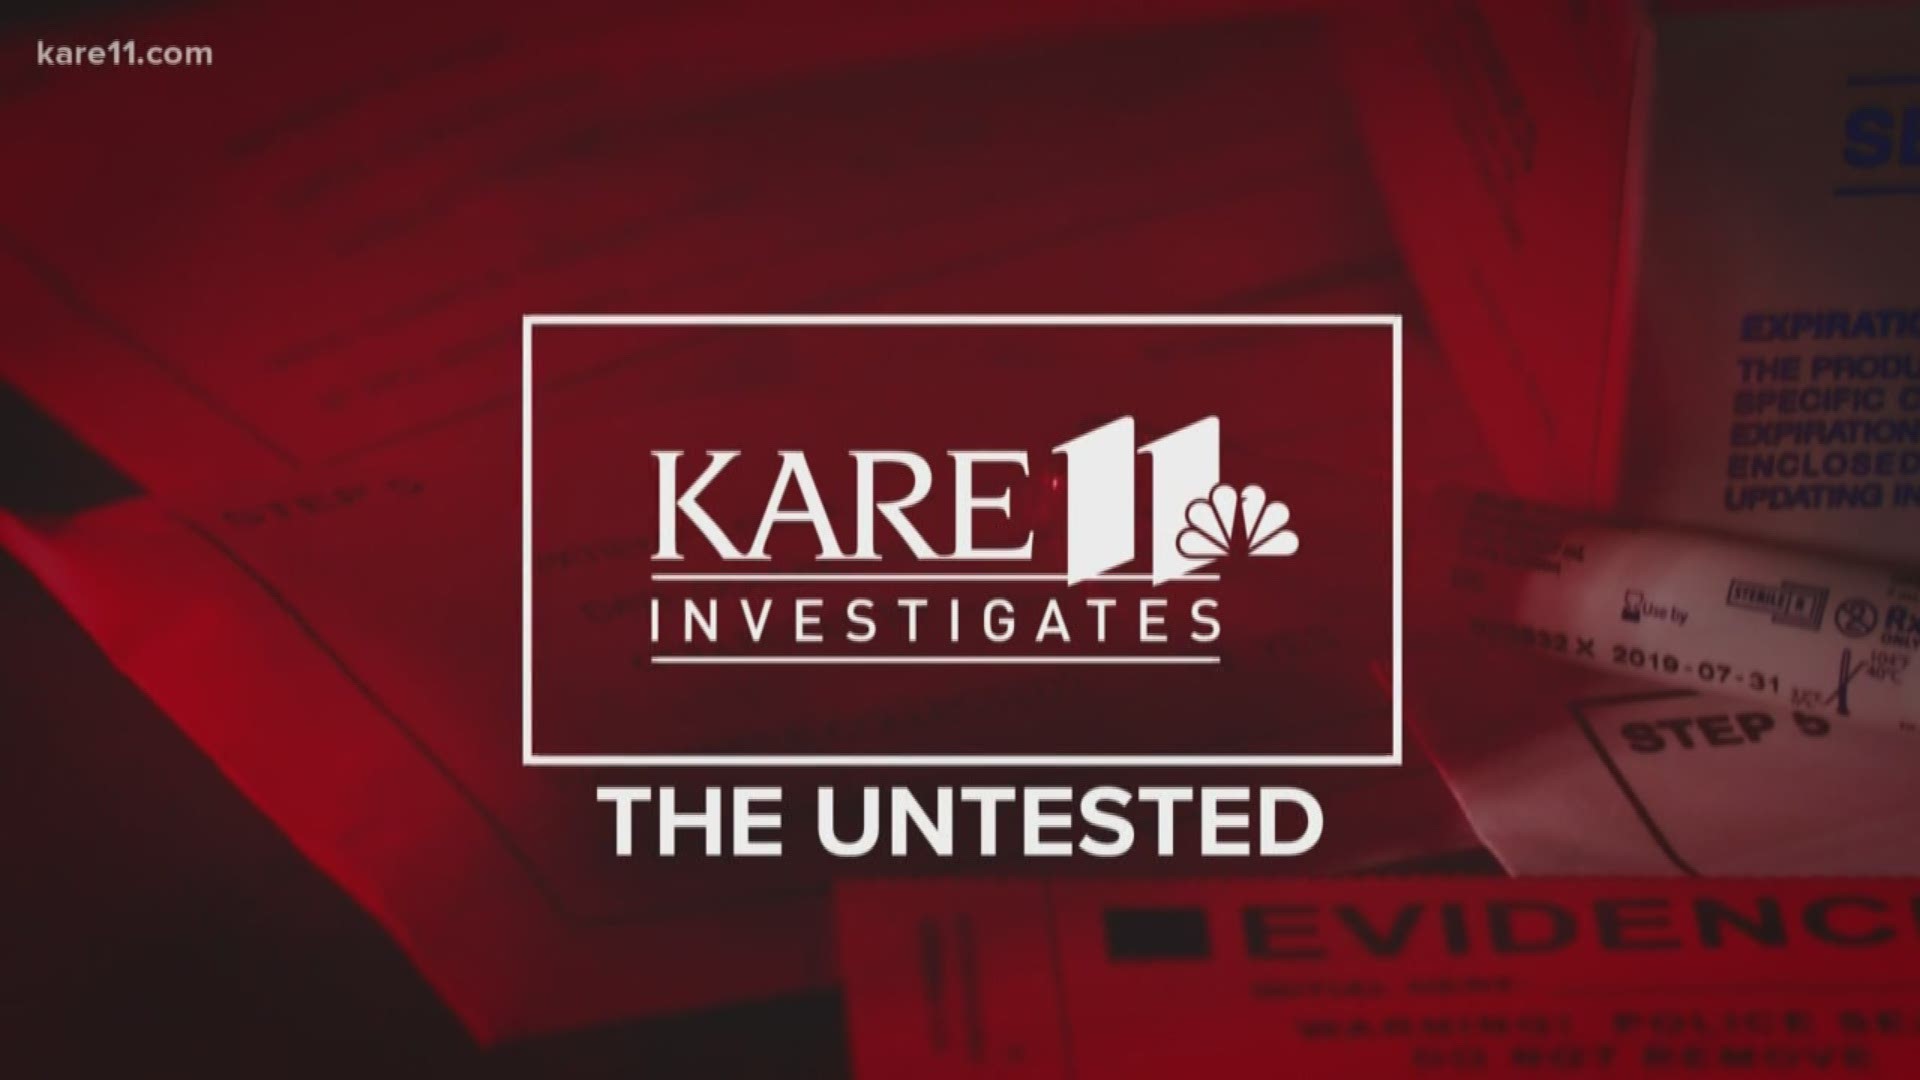 Records reviewed by KARE 11 reveal that law enforcement agencies across Minnesota are sitting on thousands of other rape kits still not tested.